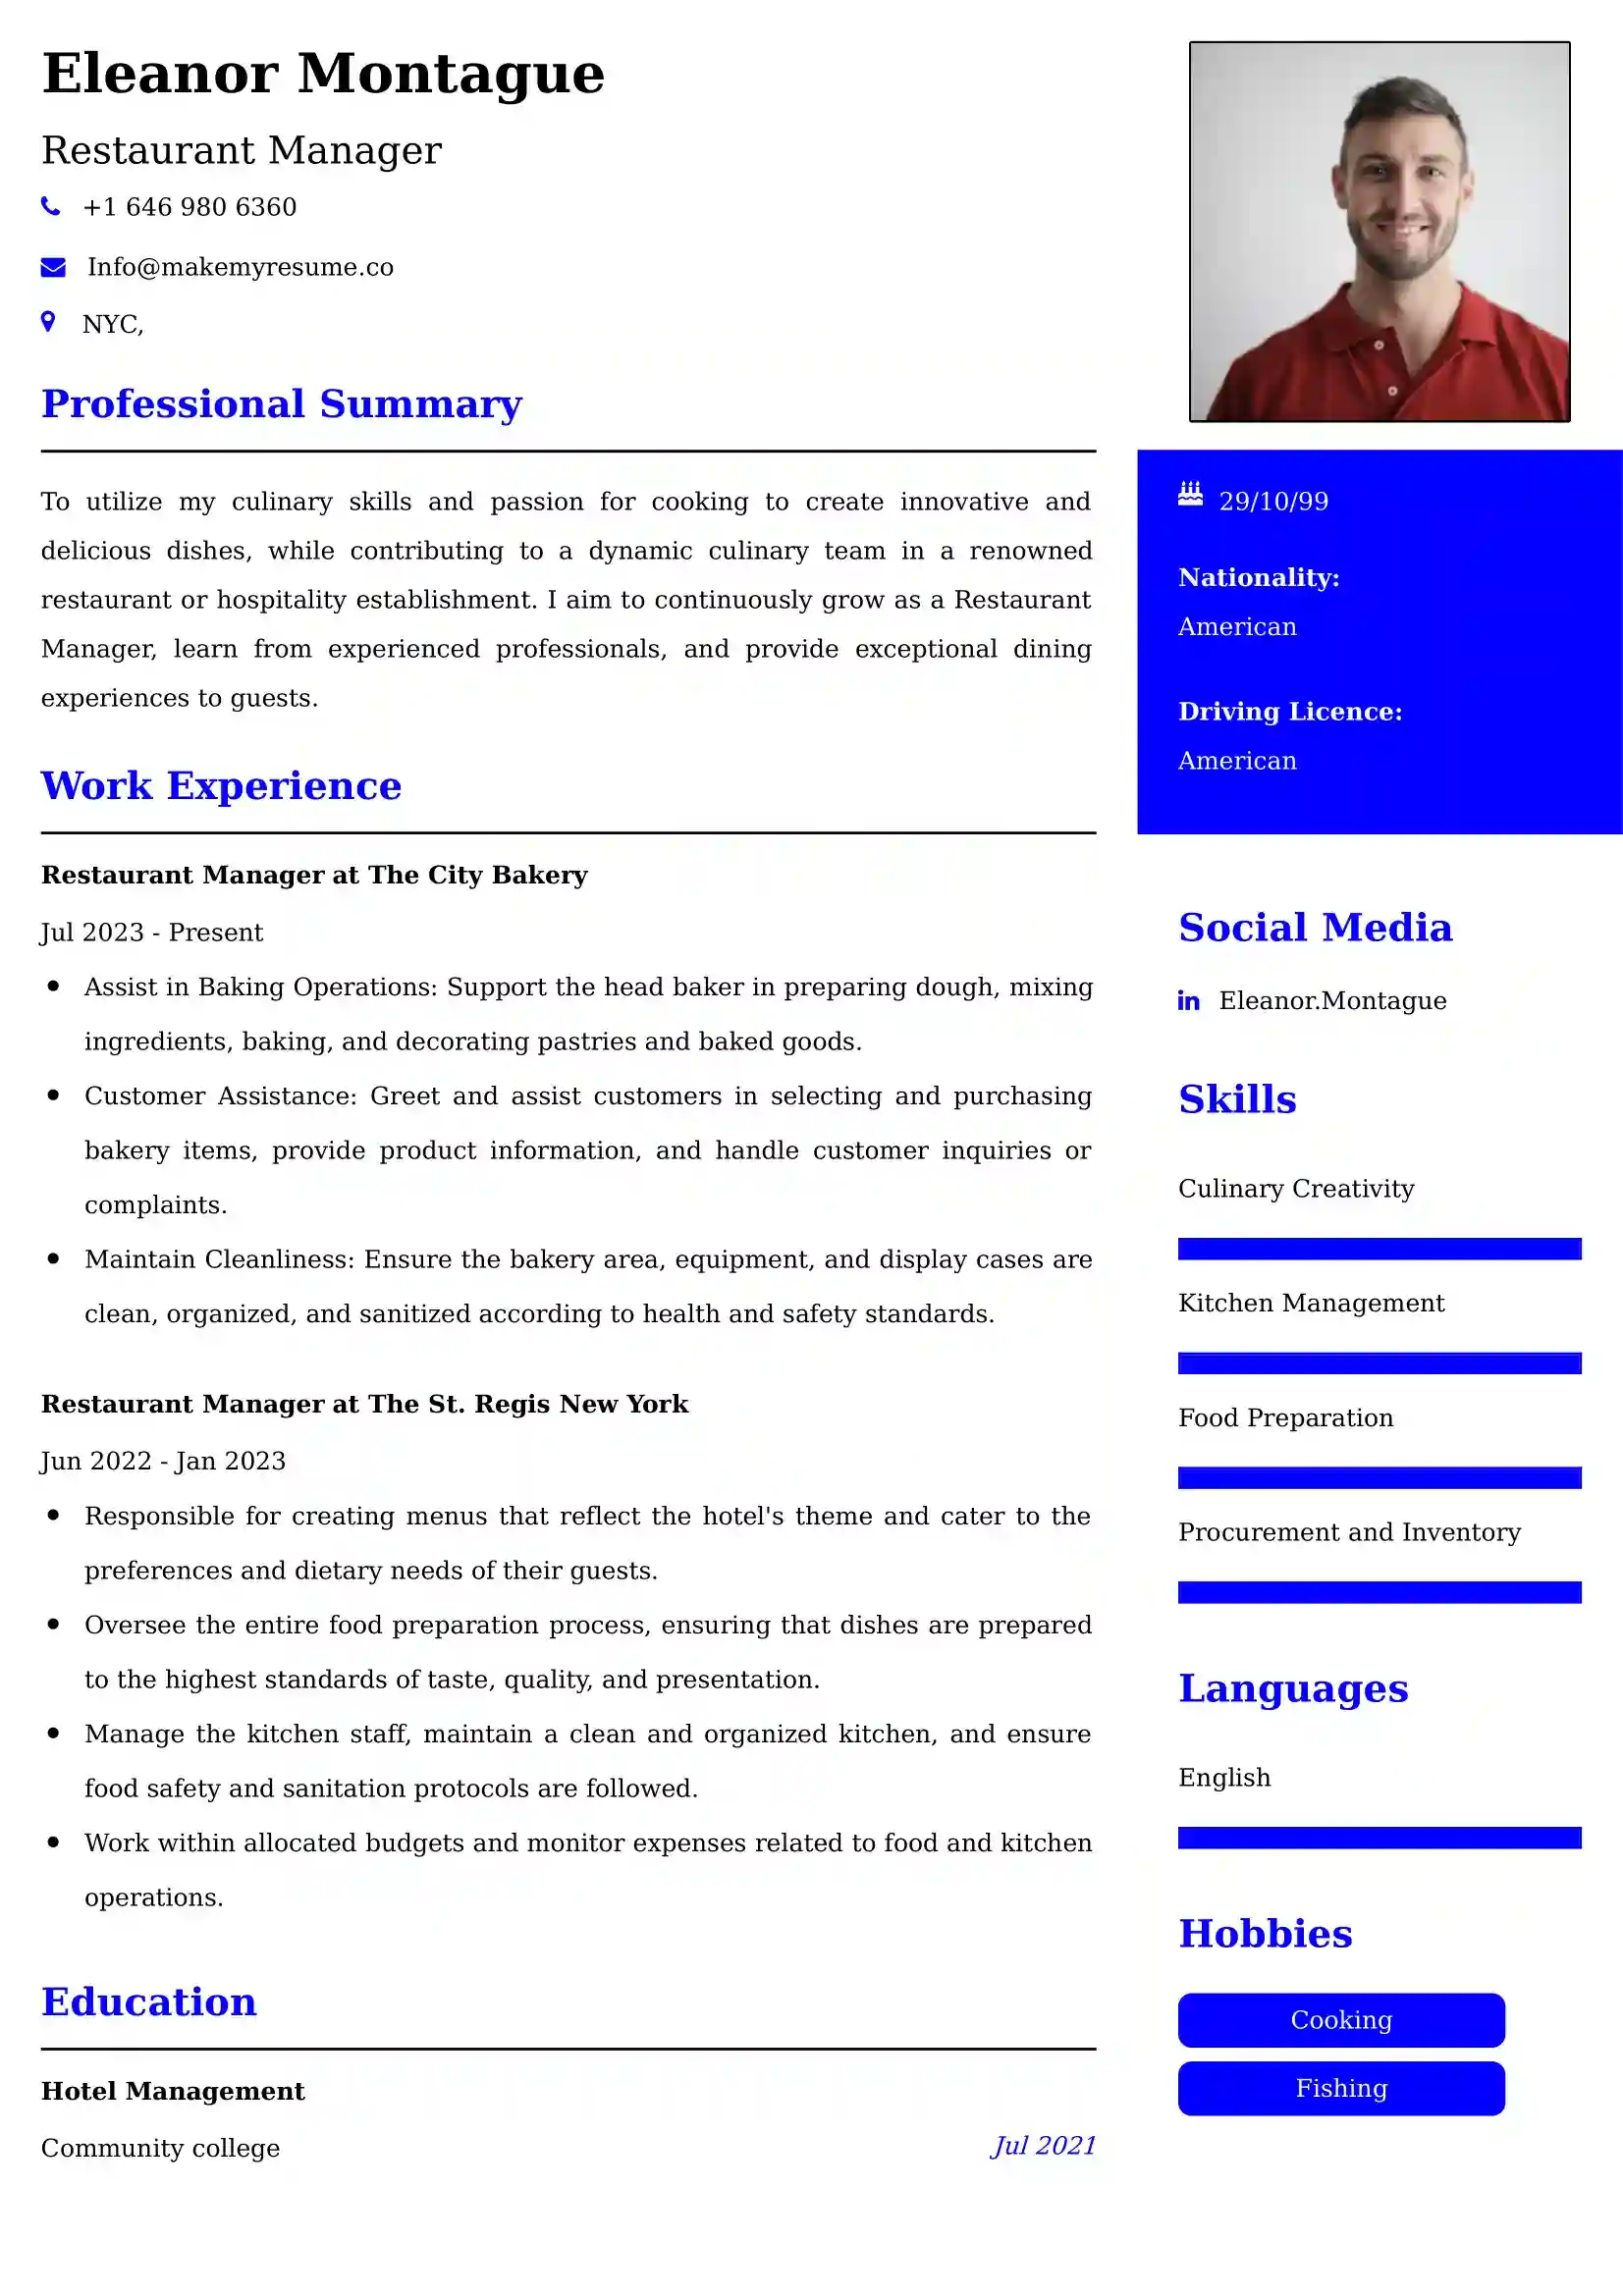 Restaurant Manager Resume Examples - UK Format, Latest Template.